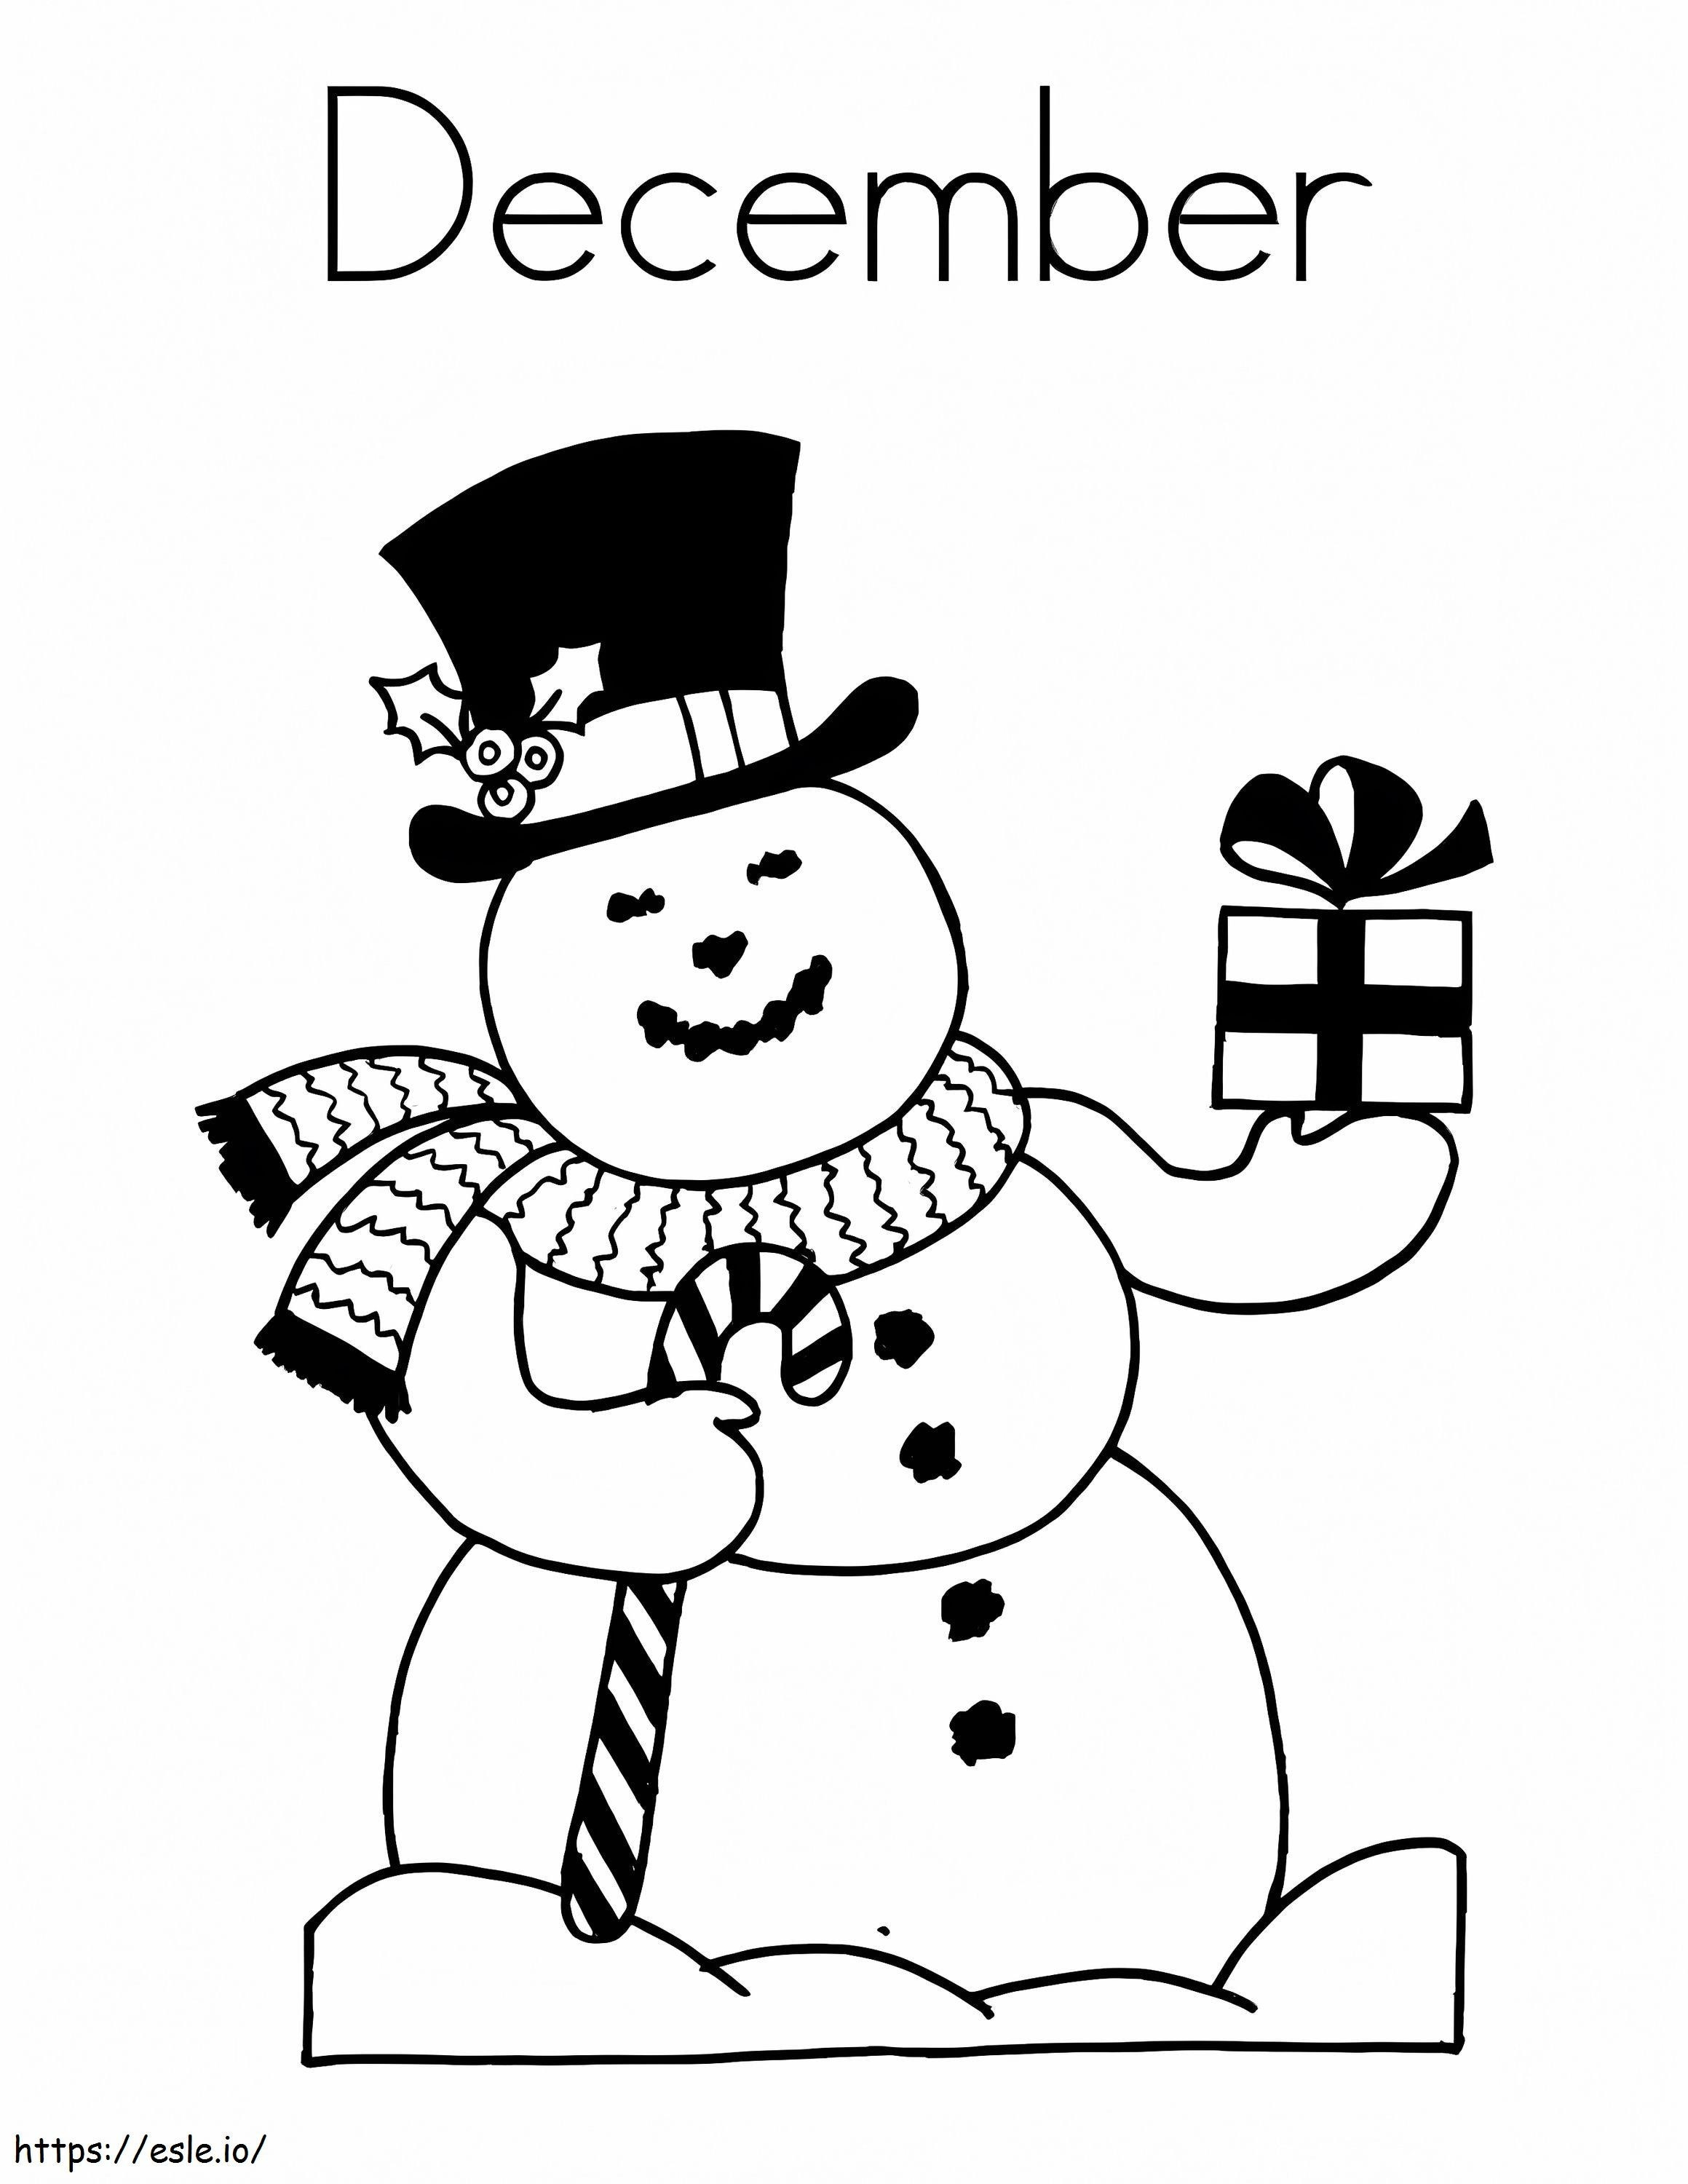 December Snowman coloring page